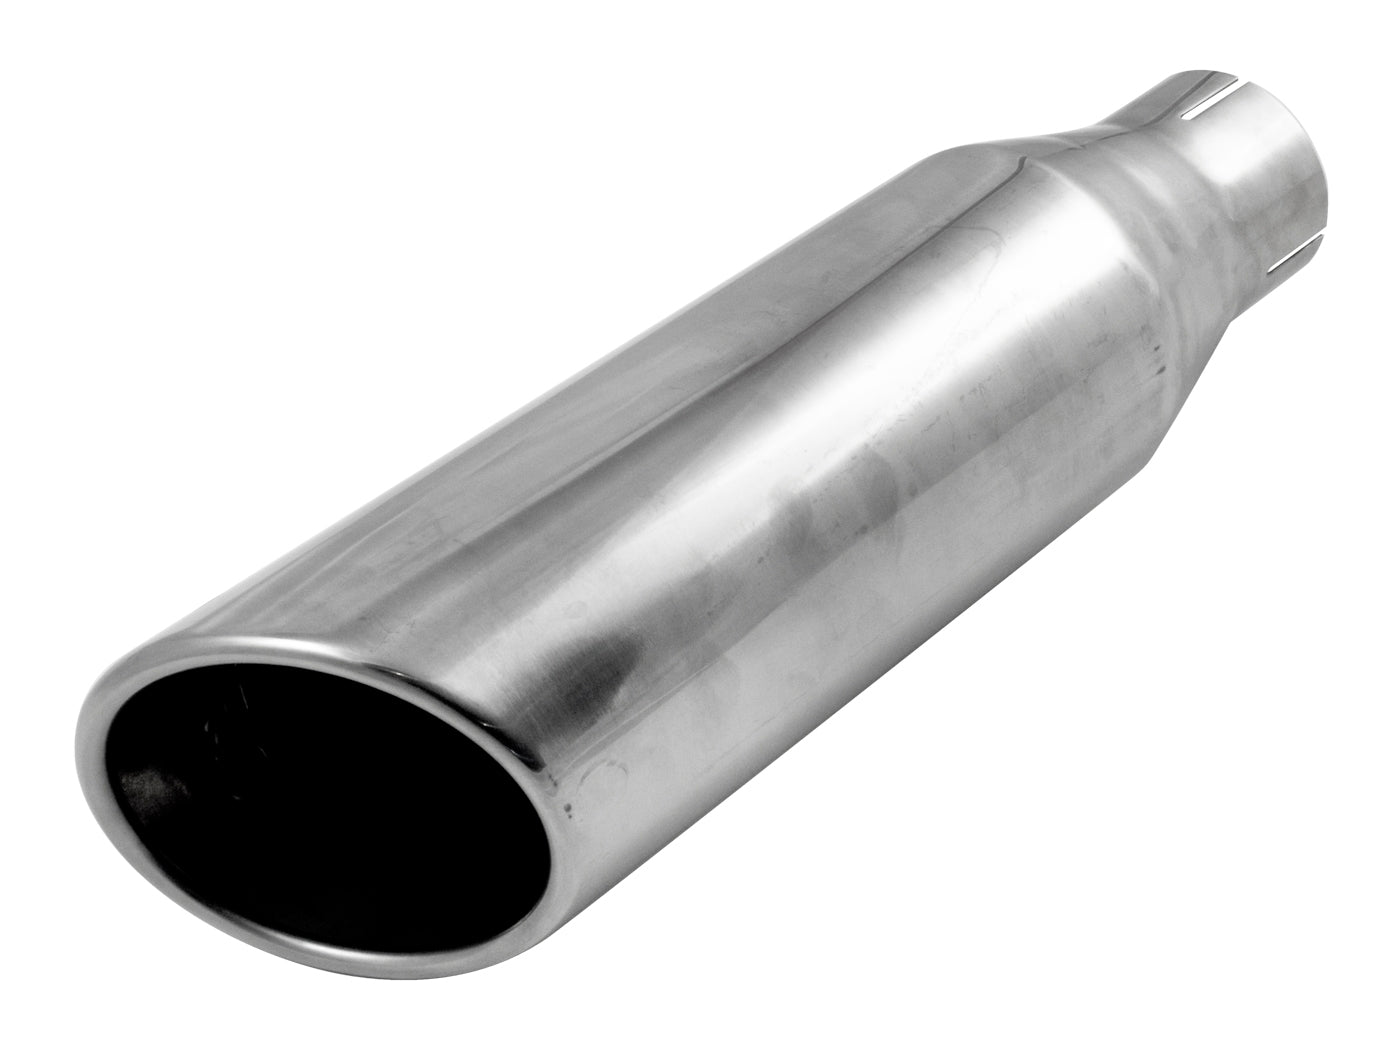 2011-2014 F150 Ecoboost 3.5 Twin Turbo 2.5" x 14" x 4.5"  Stainless Exhaust Tips